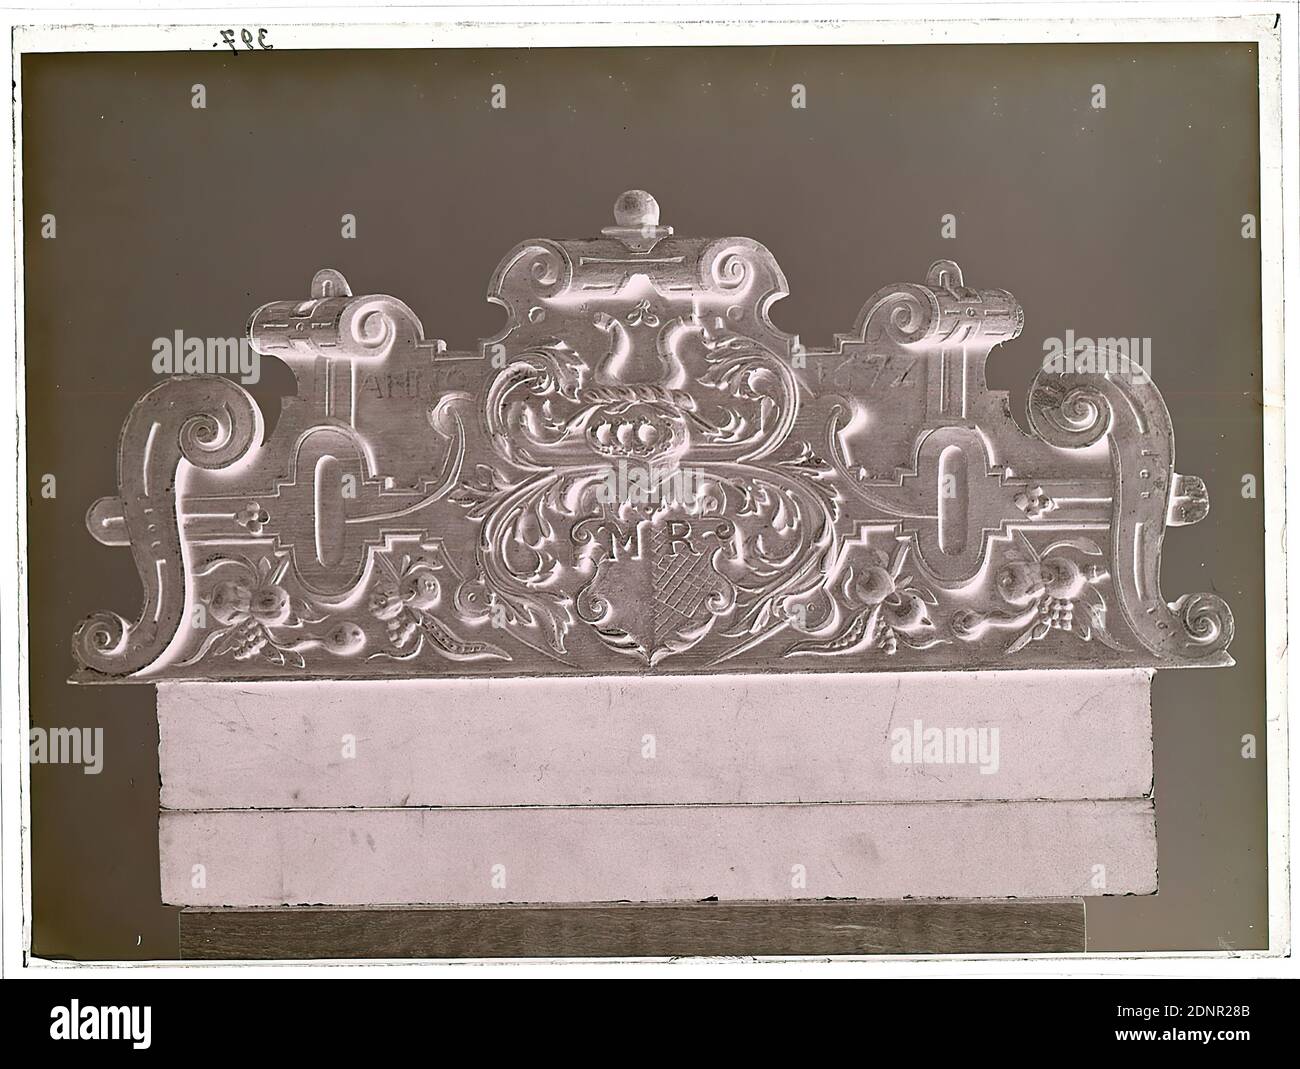 Wilhelm Weimar, carving, glass negative, black and white negative process, total: height: 23.8 cm; width: 17.8 cm, numbered: top left : in black ink: 397, photography, handicraft, arts and crafts, industrial design, wood (building materials), cartouche (ornament), shield, heraldic symbol, ornaments, plant ornaments, fruits, helmet, work of applied arts (wood, z. As a trained engraver and graduate of the School of Applied Arts Stock Photo